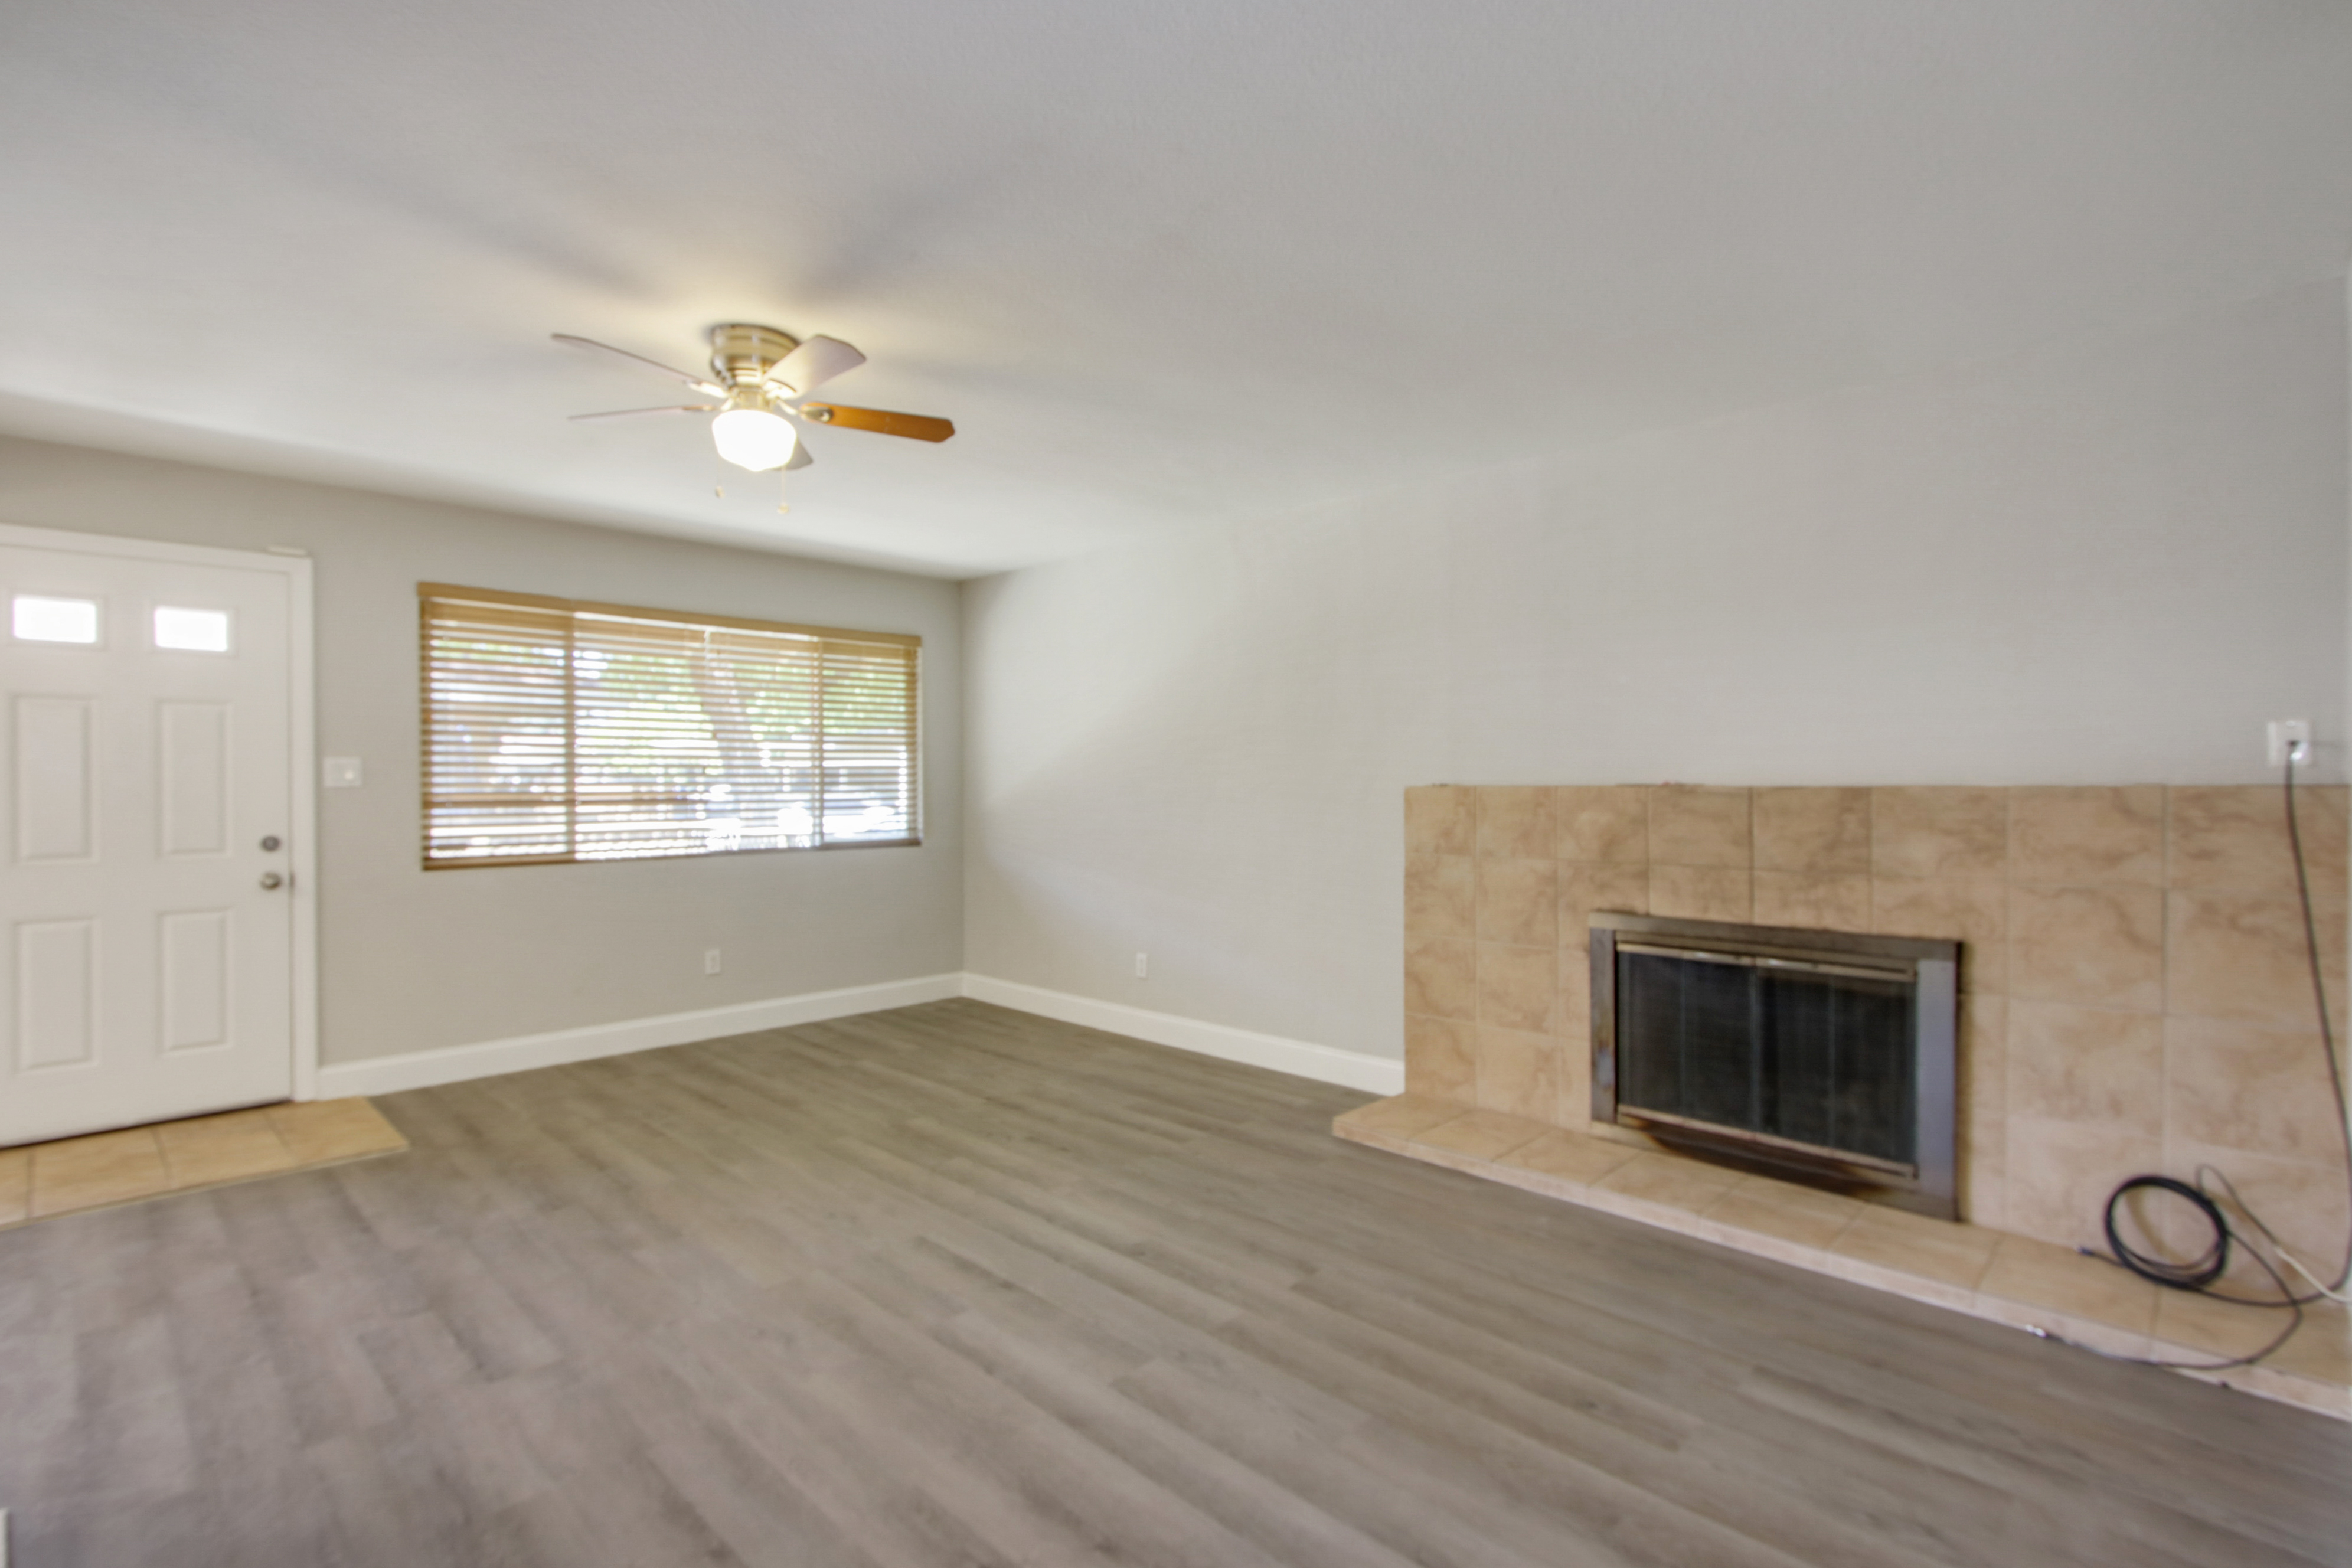 5001 Bremner Lane Unit 1 - Sacramento -  presented by James Tan MBA Broker/Realtor - Bethany Real Estate and Investments - One of the best real estate agent in Elk Grove